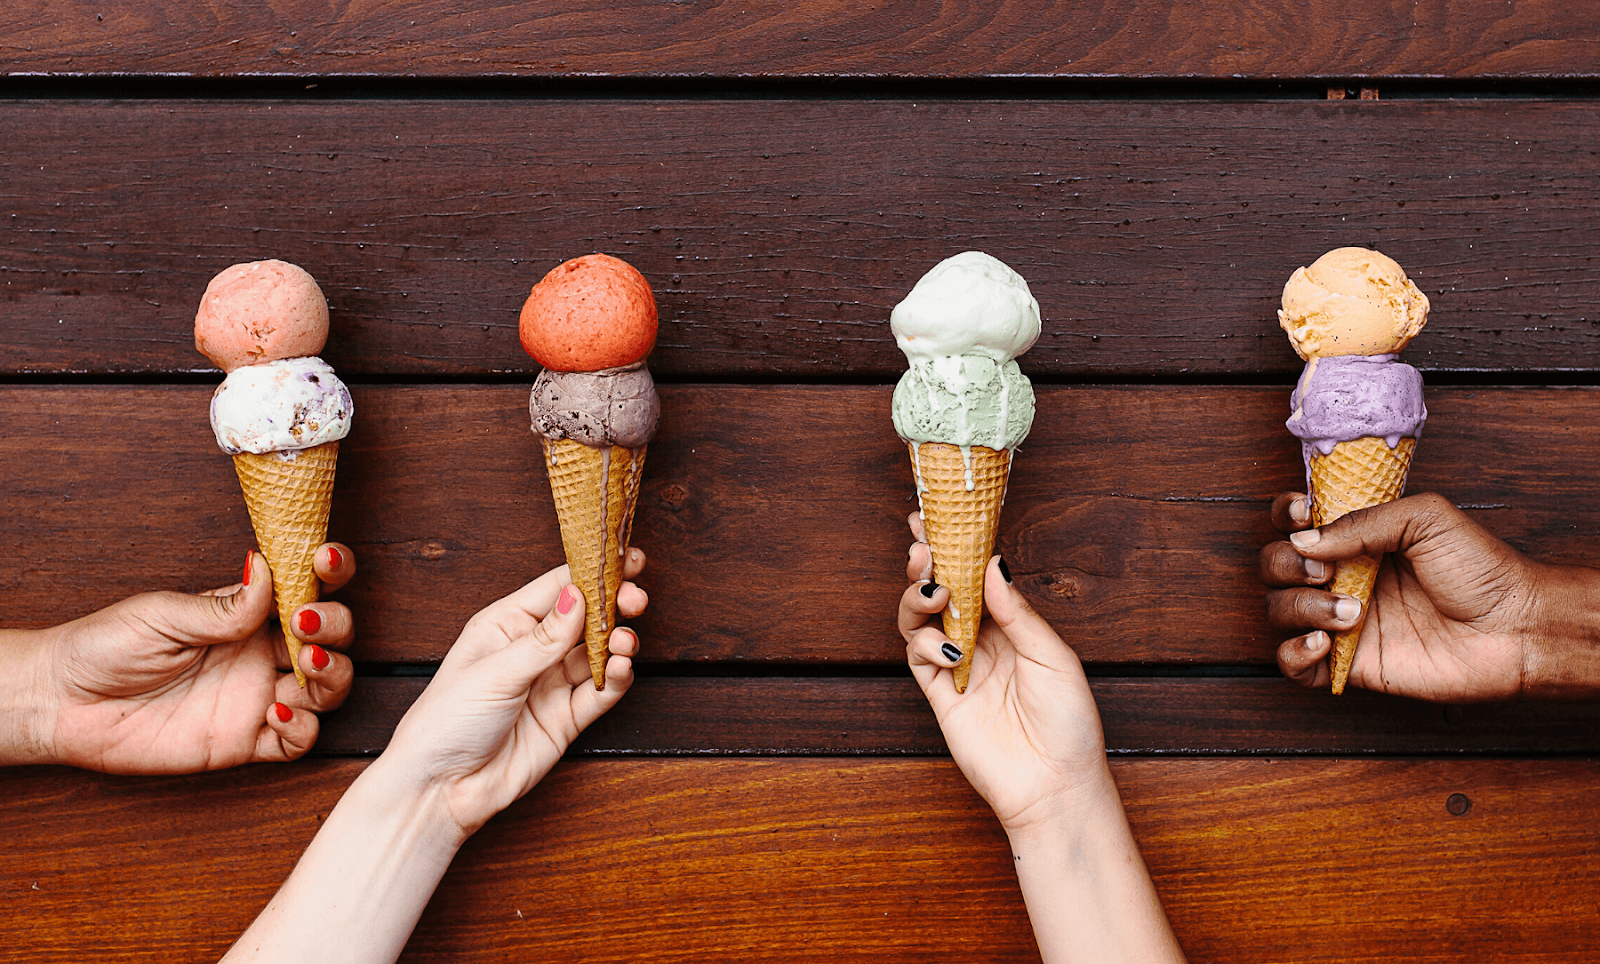 Four hands hold up four cones of ice cream, each with two scoops of different flavors.